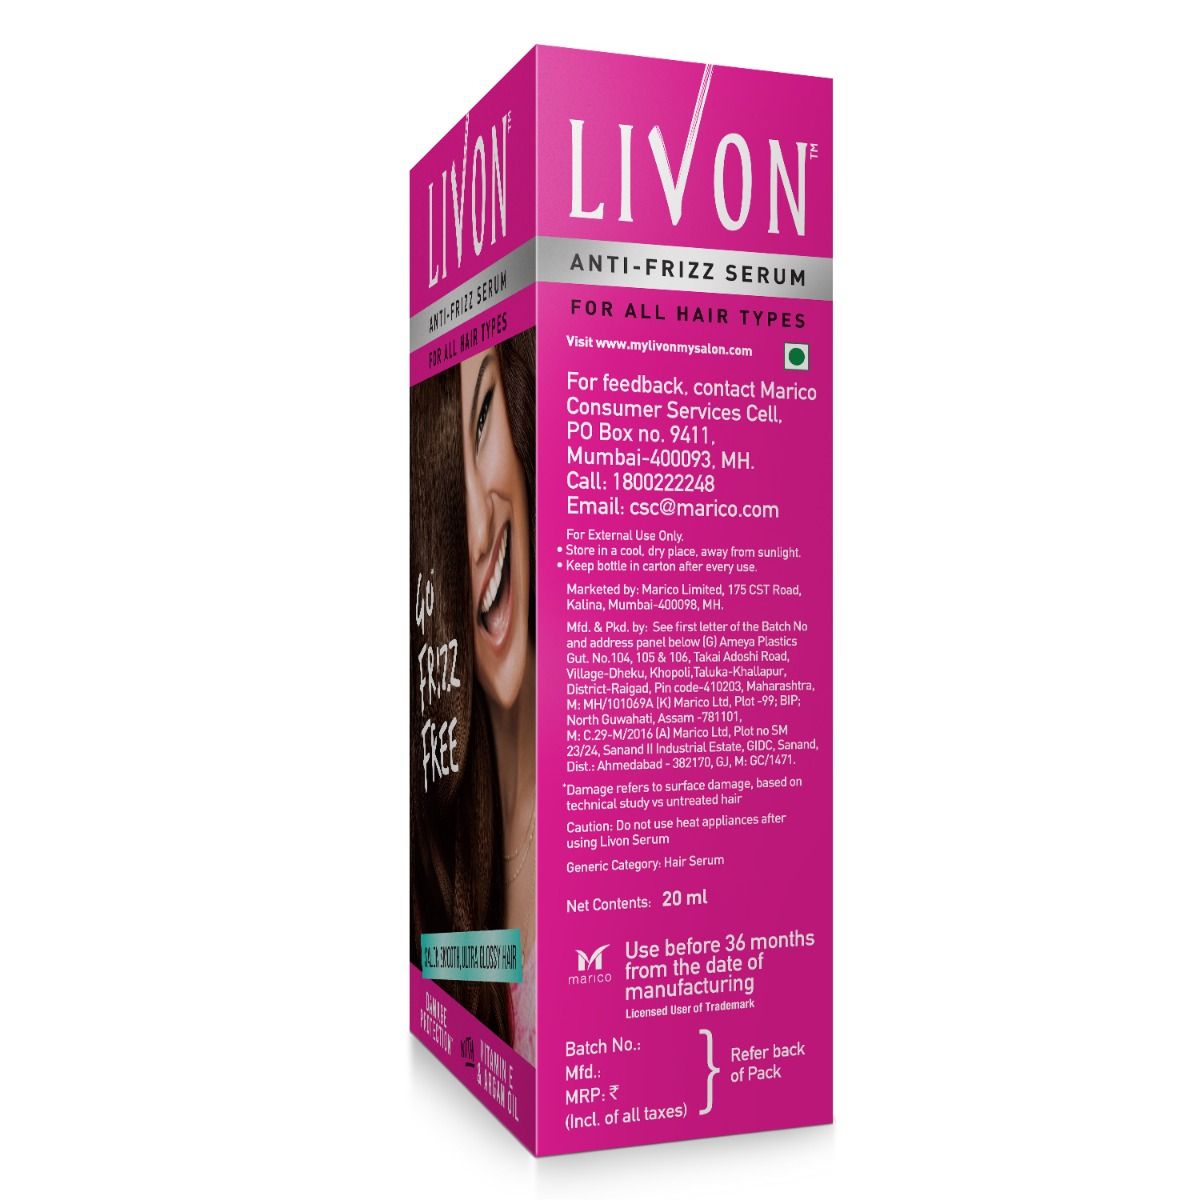 Livon Anti-Frizz Serum For All Hair Types, 20ml, Pack of 1 